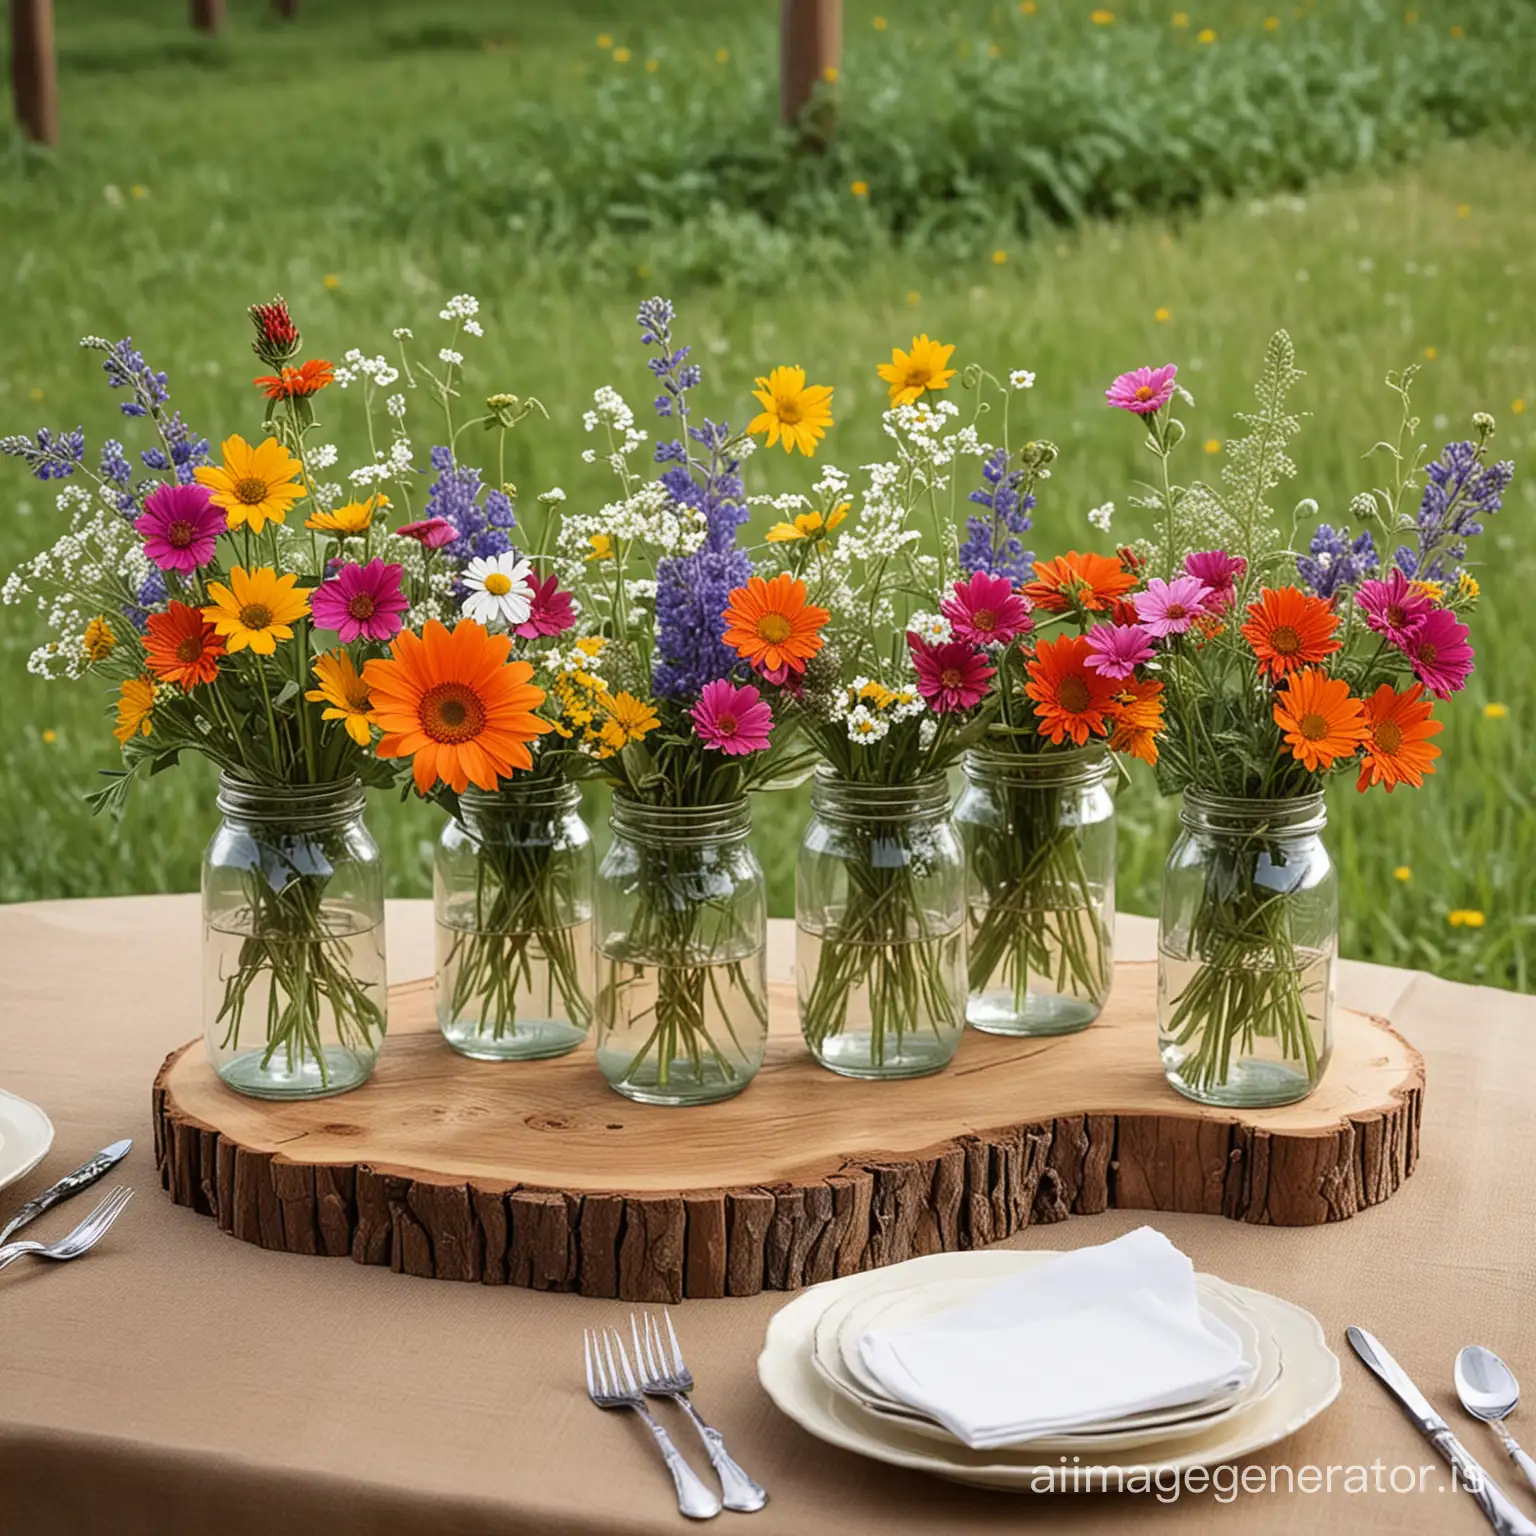 Rustic-Wildflower-Centerpiece-Natural-Wood-Slice-Bases-and-Vibrant-Blooms